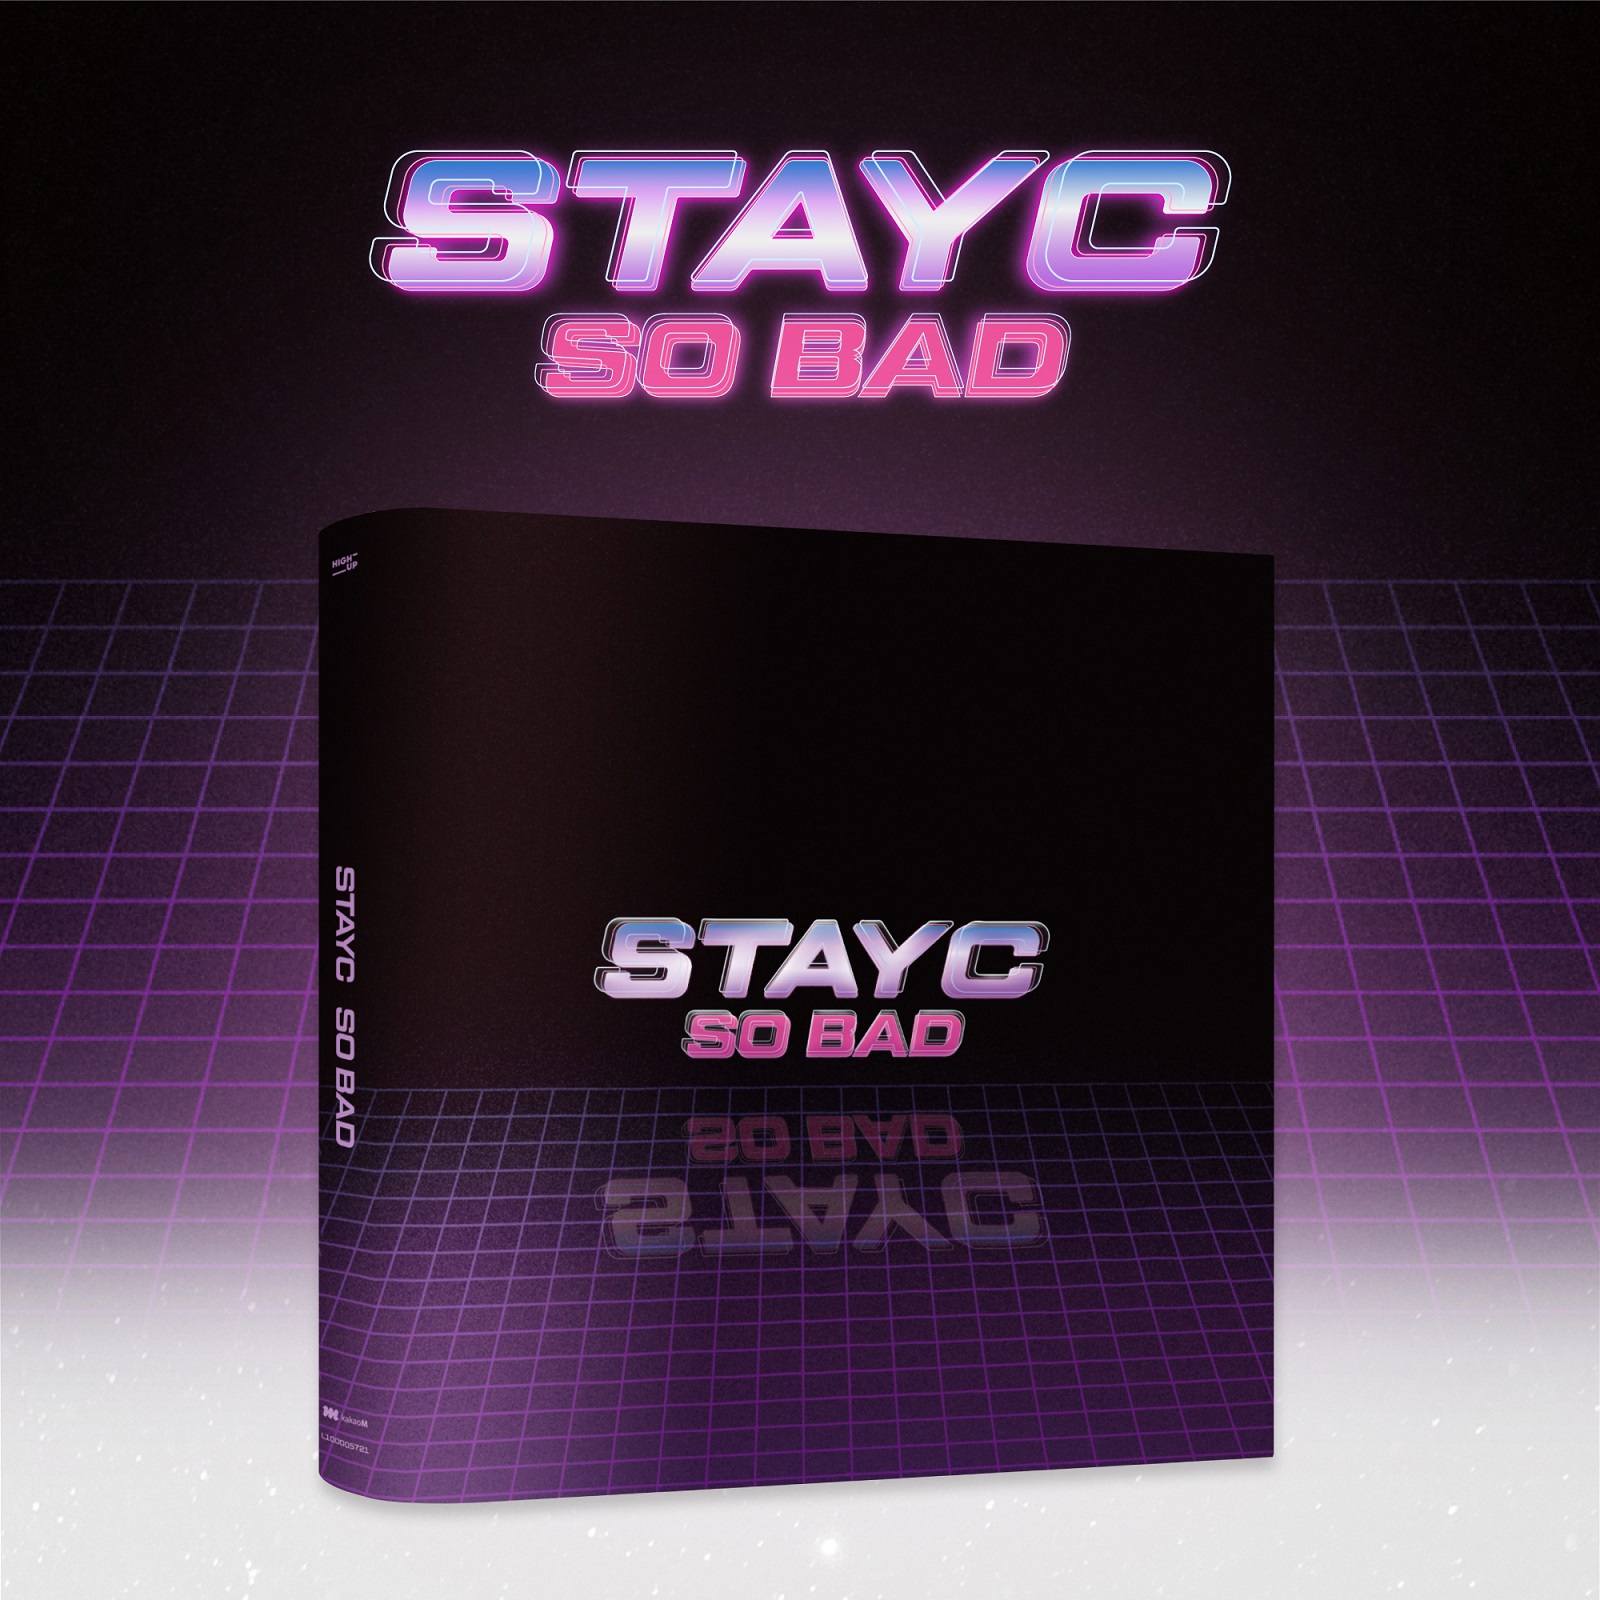 [PRE-ORDER] STAYC(스테이씨) - Single Vol.1 [Star To A Young Culture]케이팝스토어(kpop store)